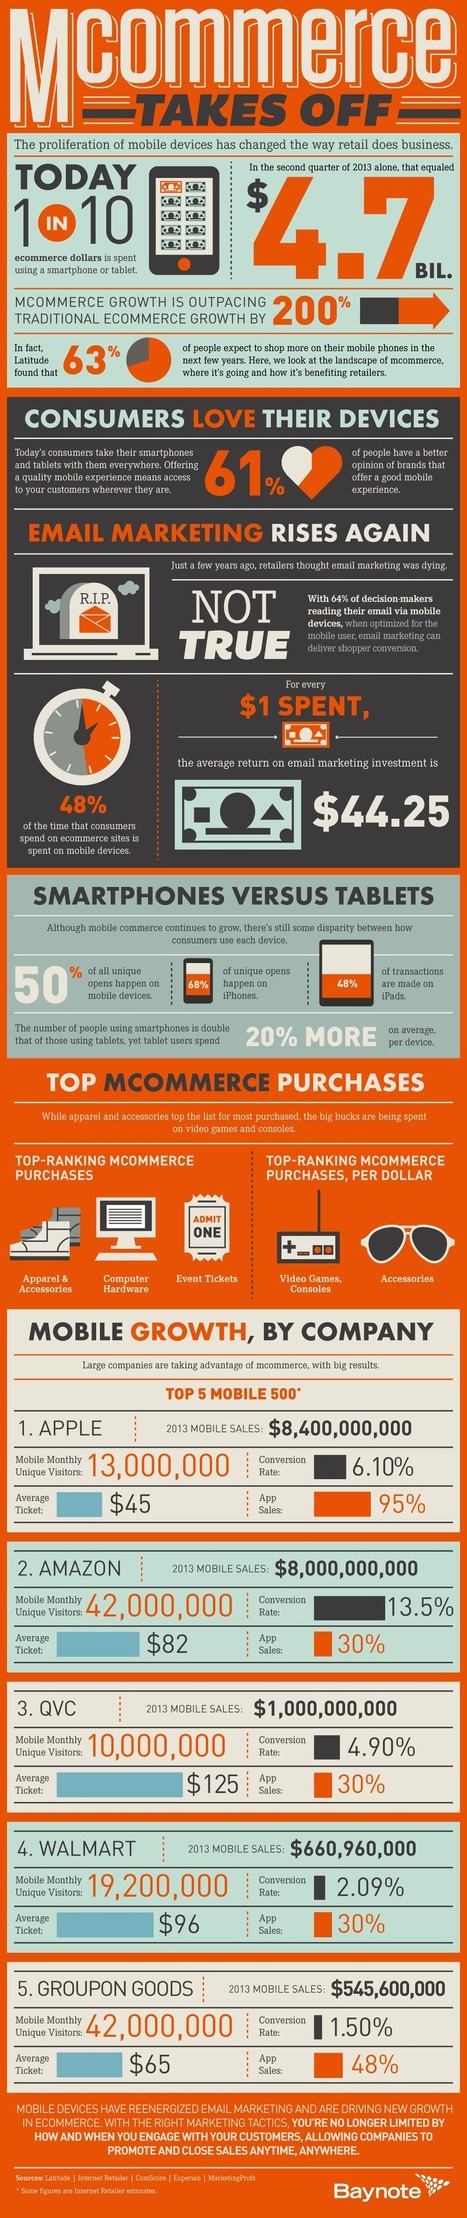 Infographic: MCommerce Growing 200% Faster than ECommerce | Design, Science and Technology | Scoop.it